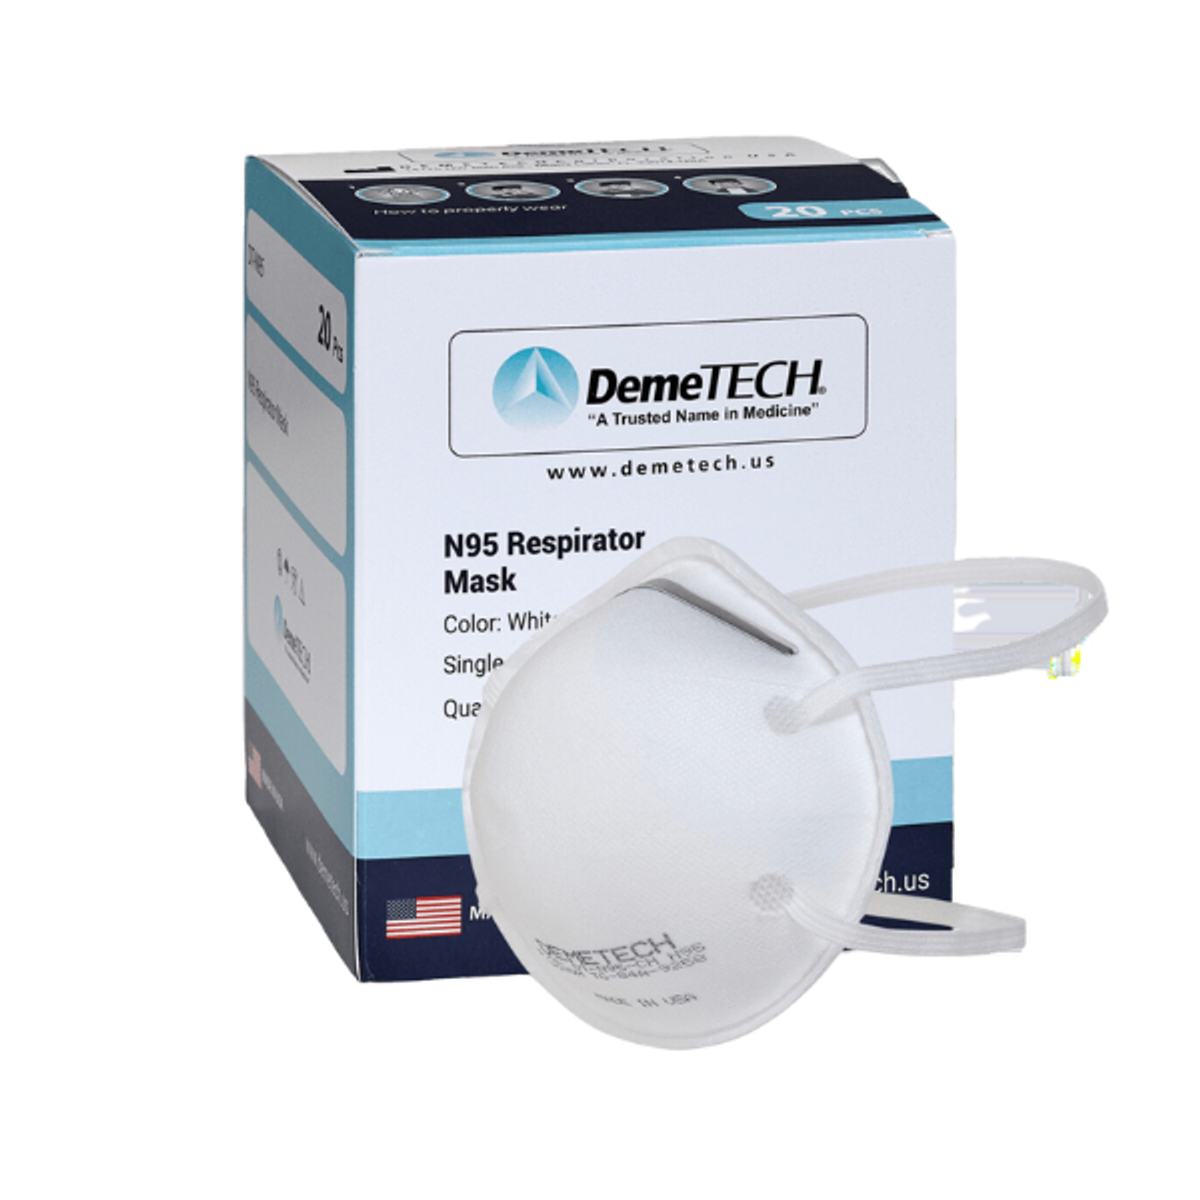 Demetech N95 Surgical Respirator, Fold Style with Headbands